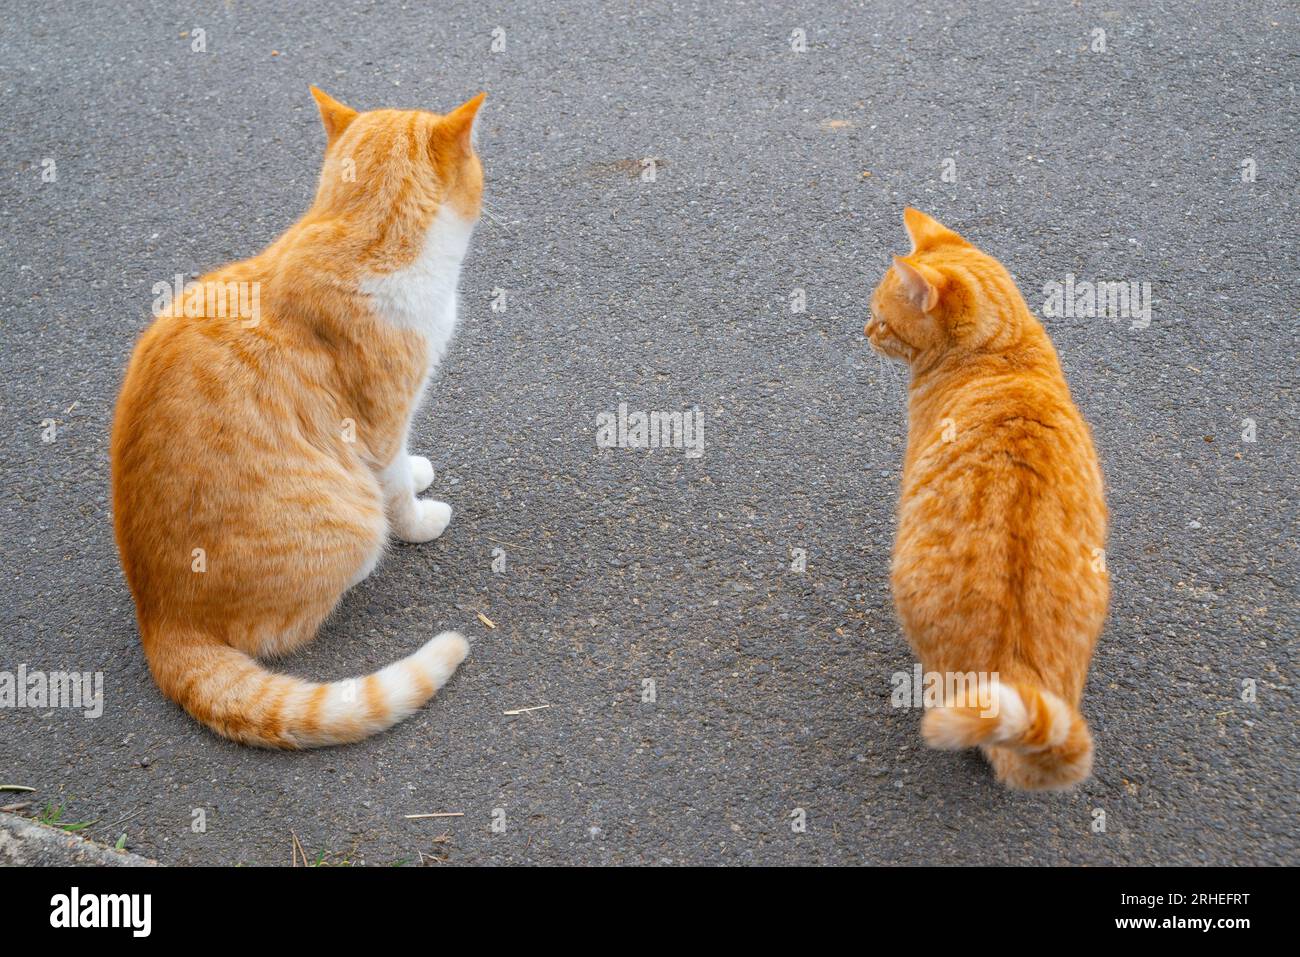 Two tabby and white cats sitting. Stock Photo